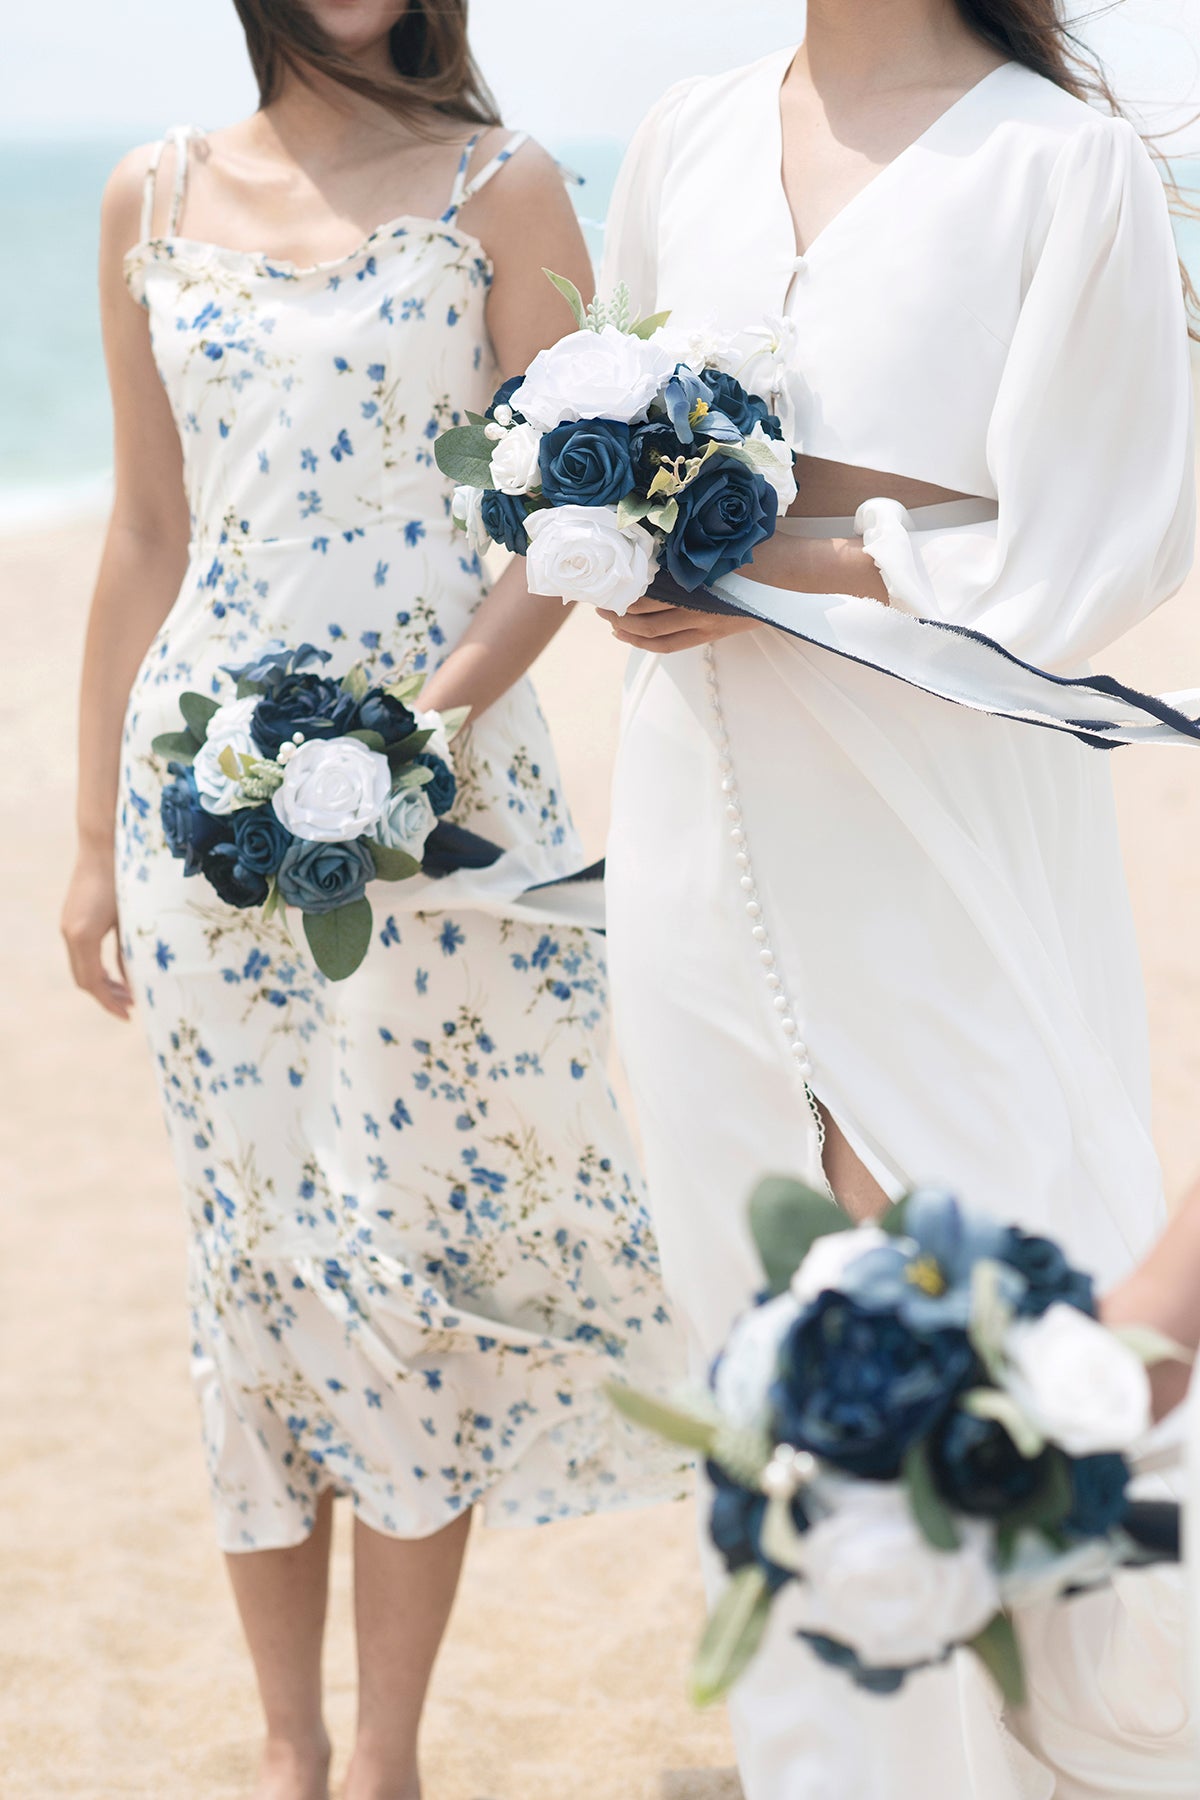 Maid of Honor & Bridesmaid Bouquets in Noble Navy Blue